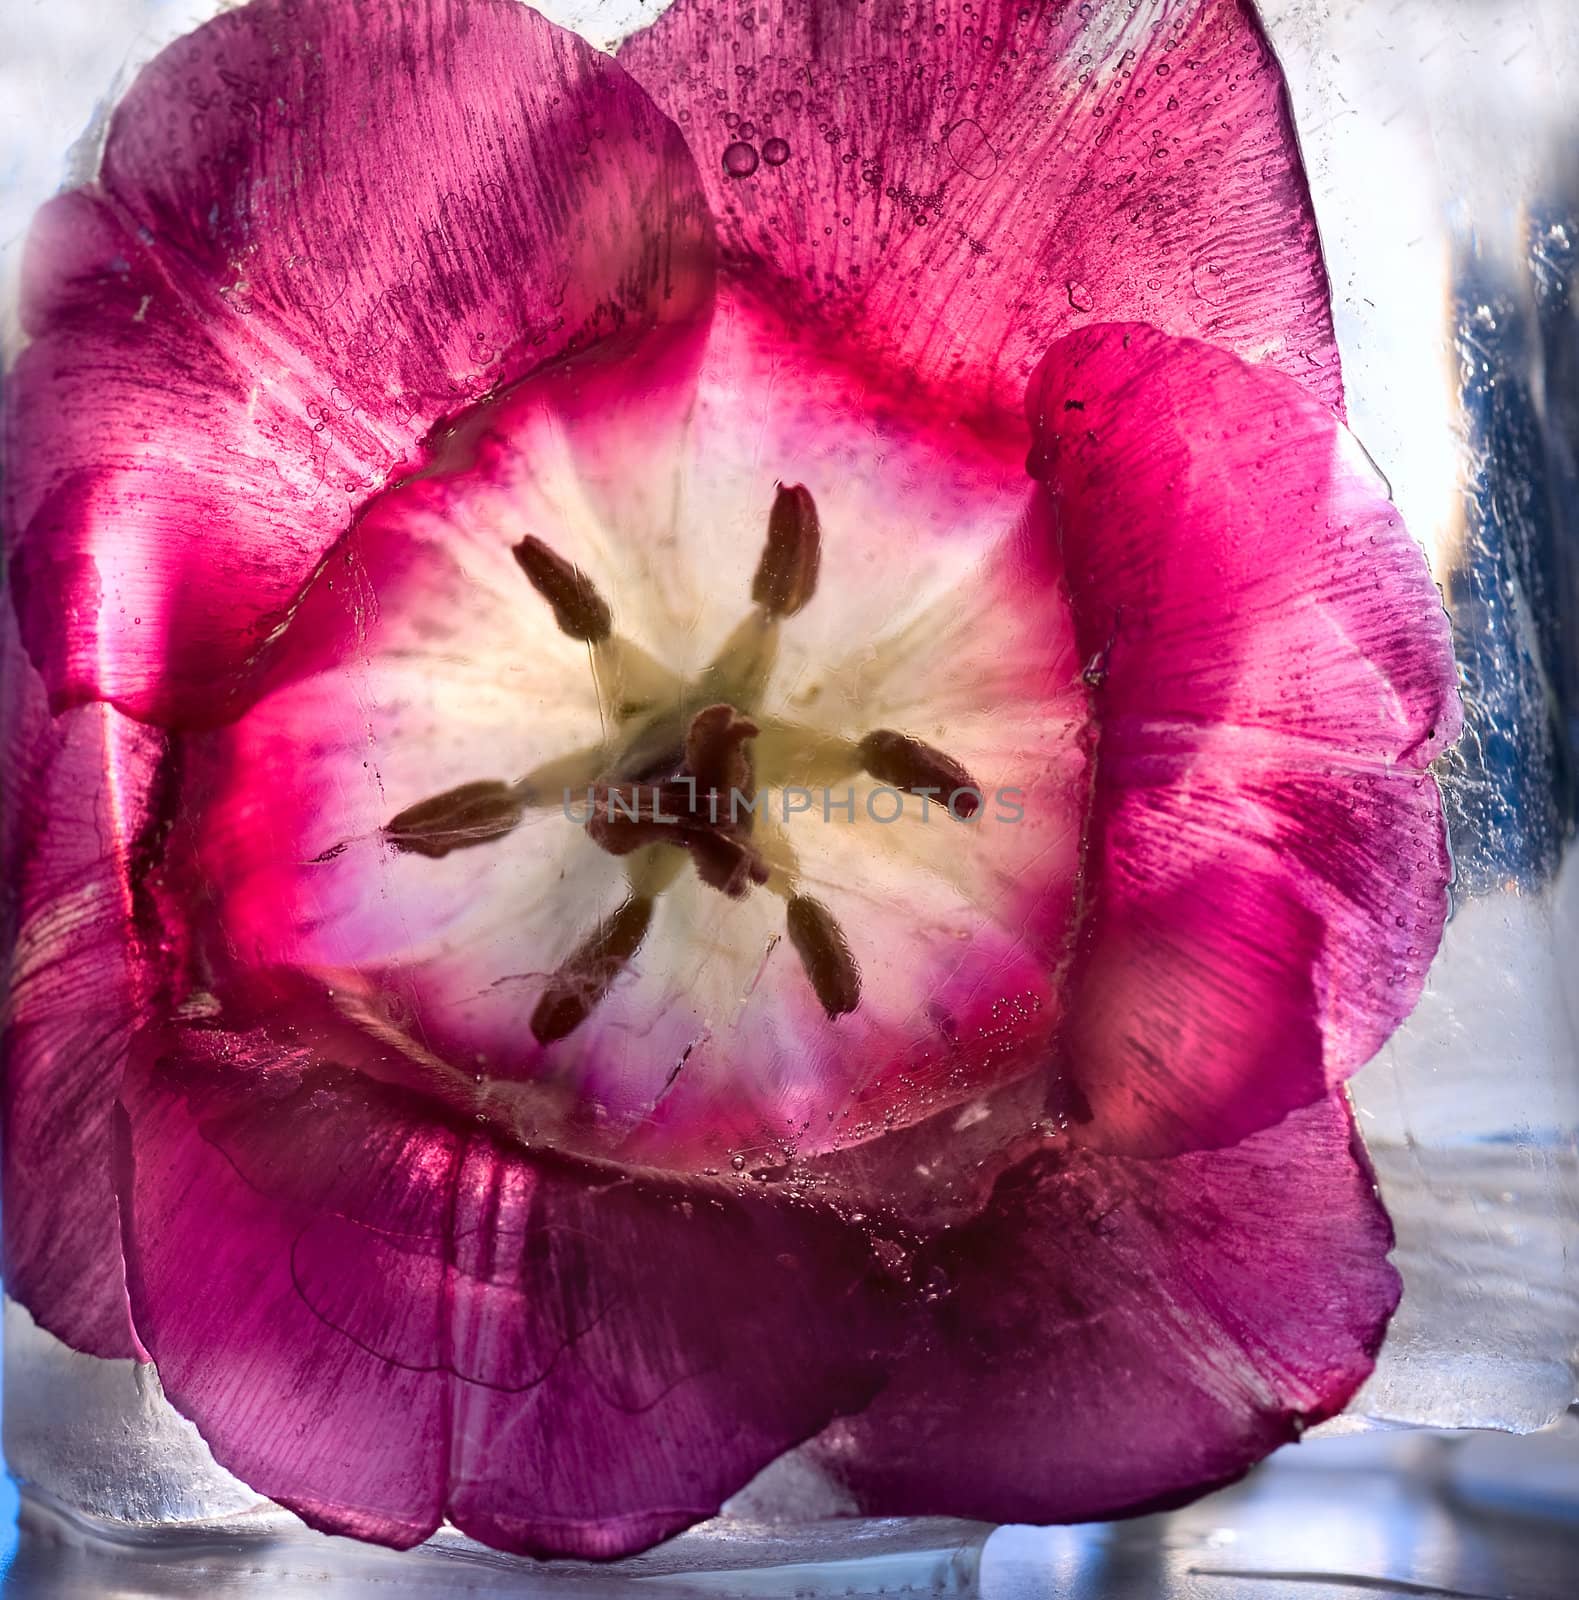 Frozen beautiful   tulip flower.  blossomsin the ice cube 